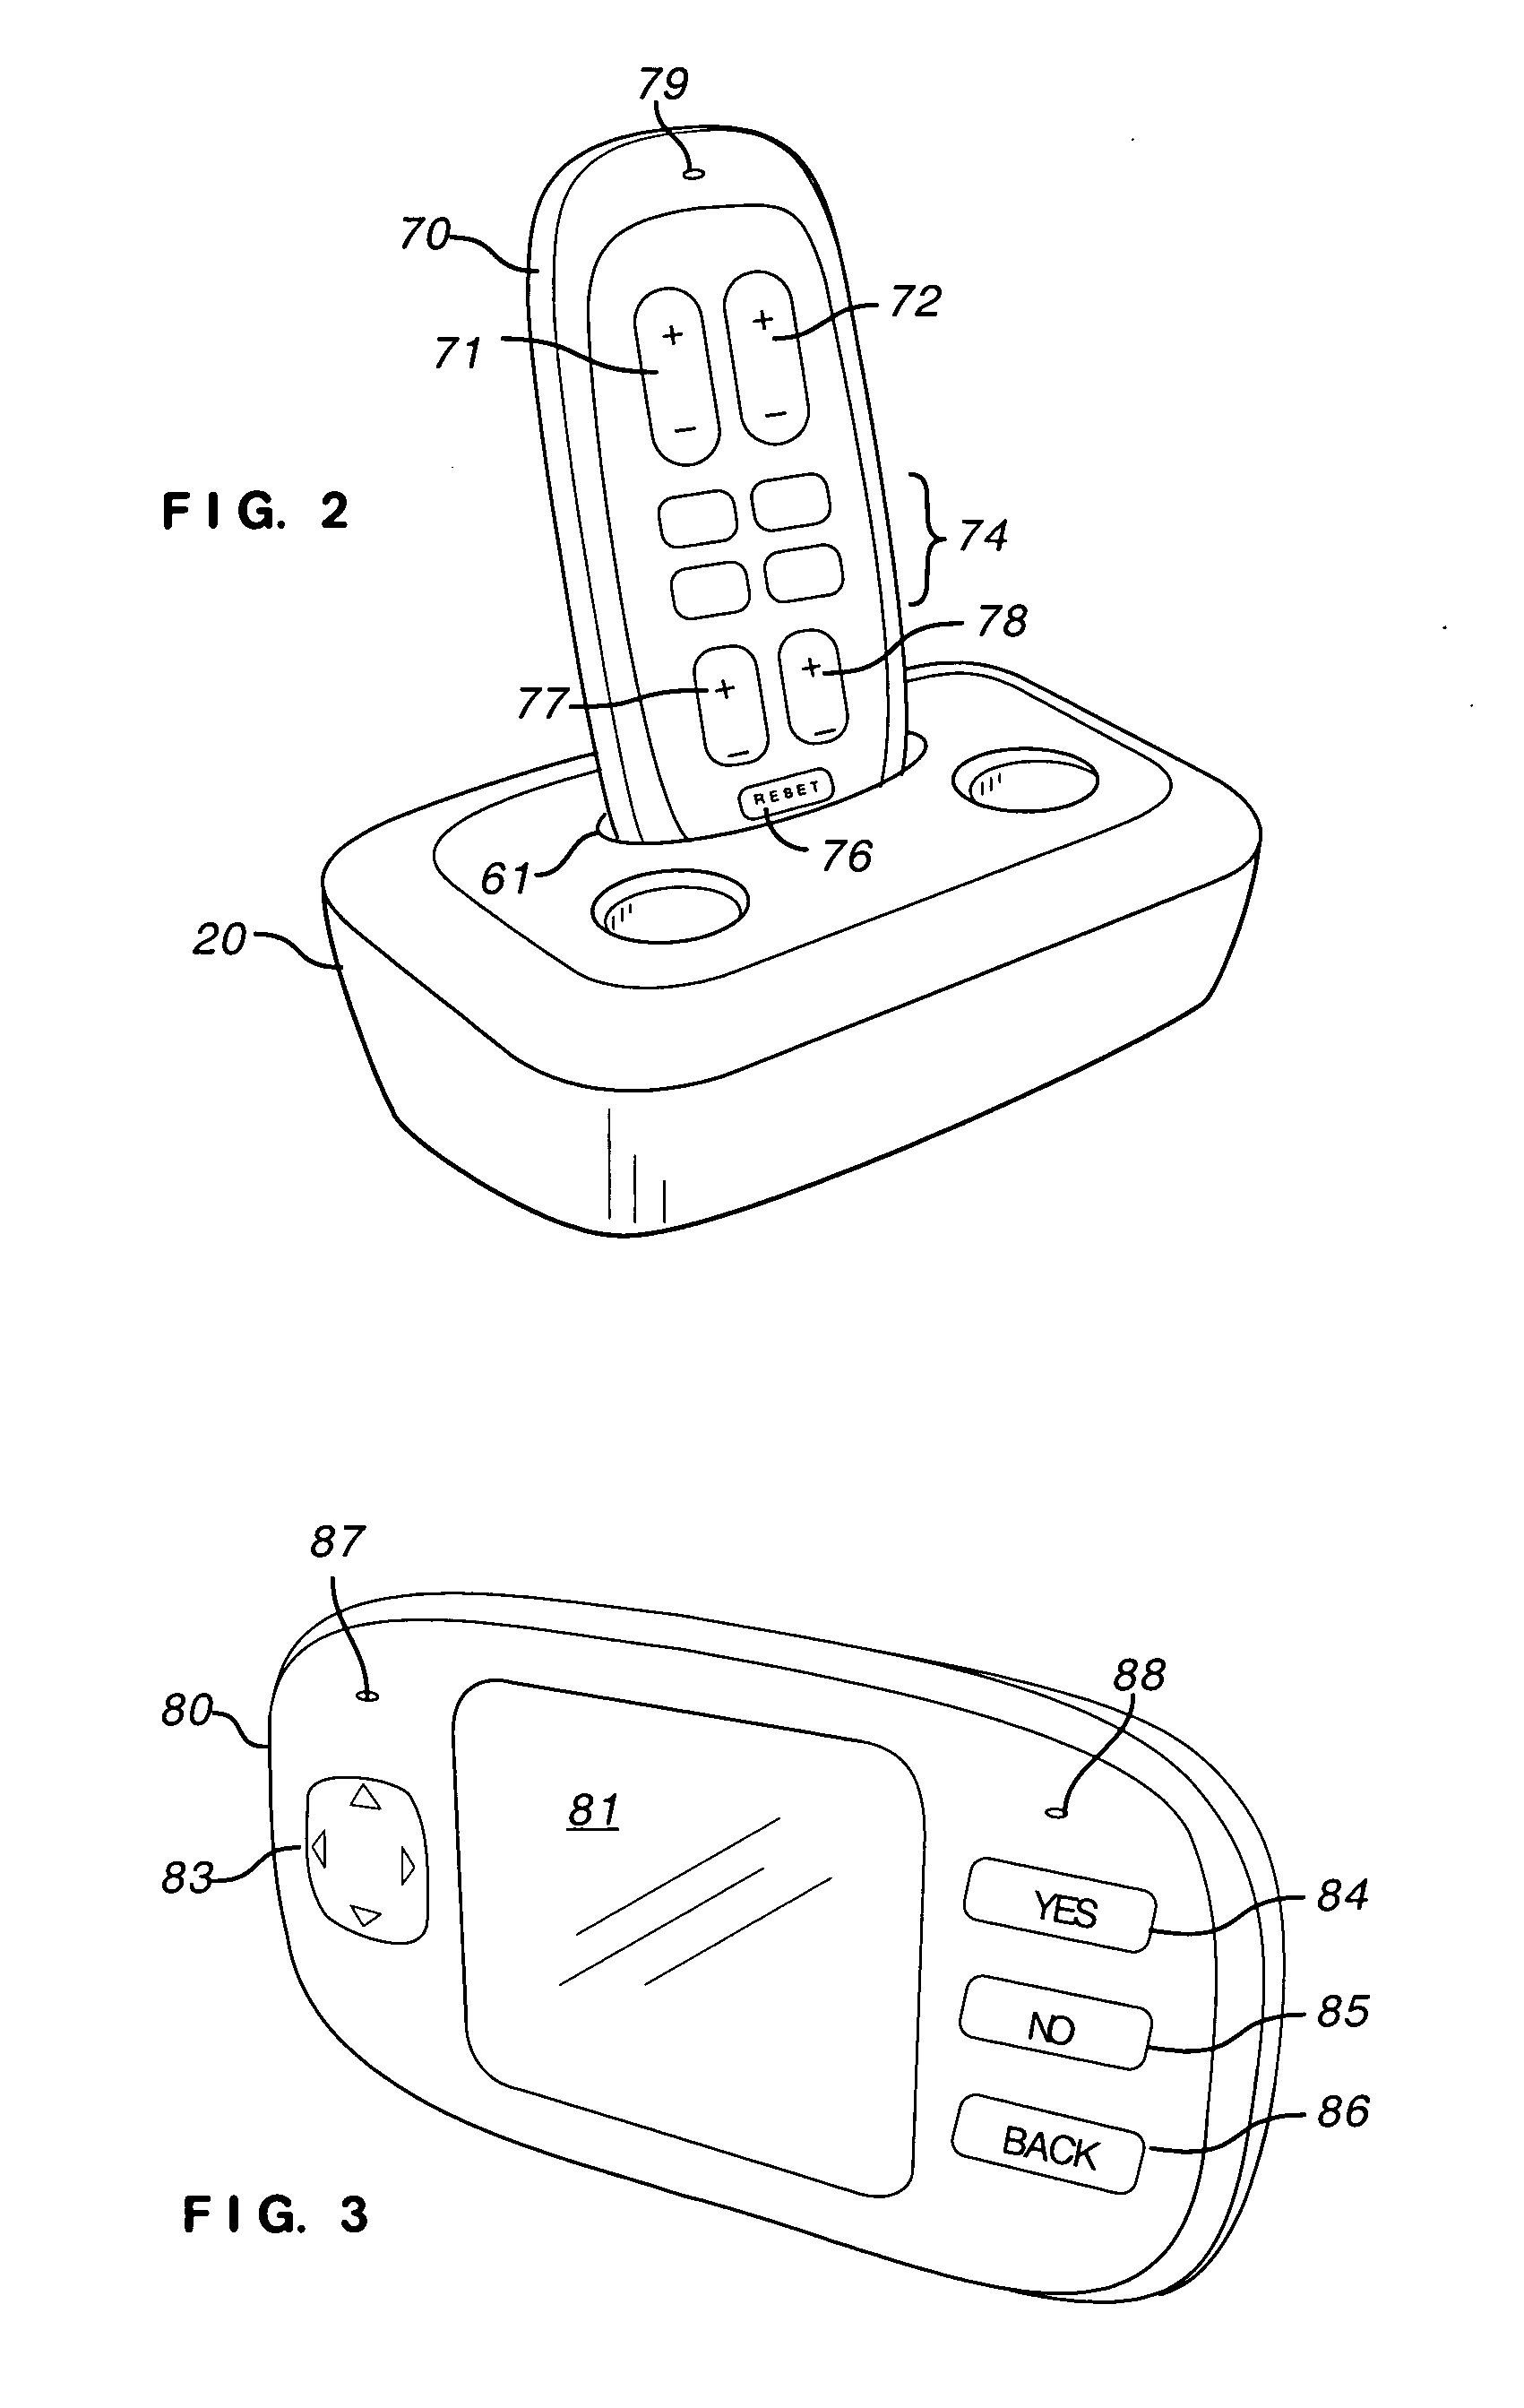 Method for communicating with a hearing aid